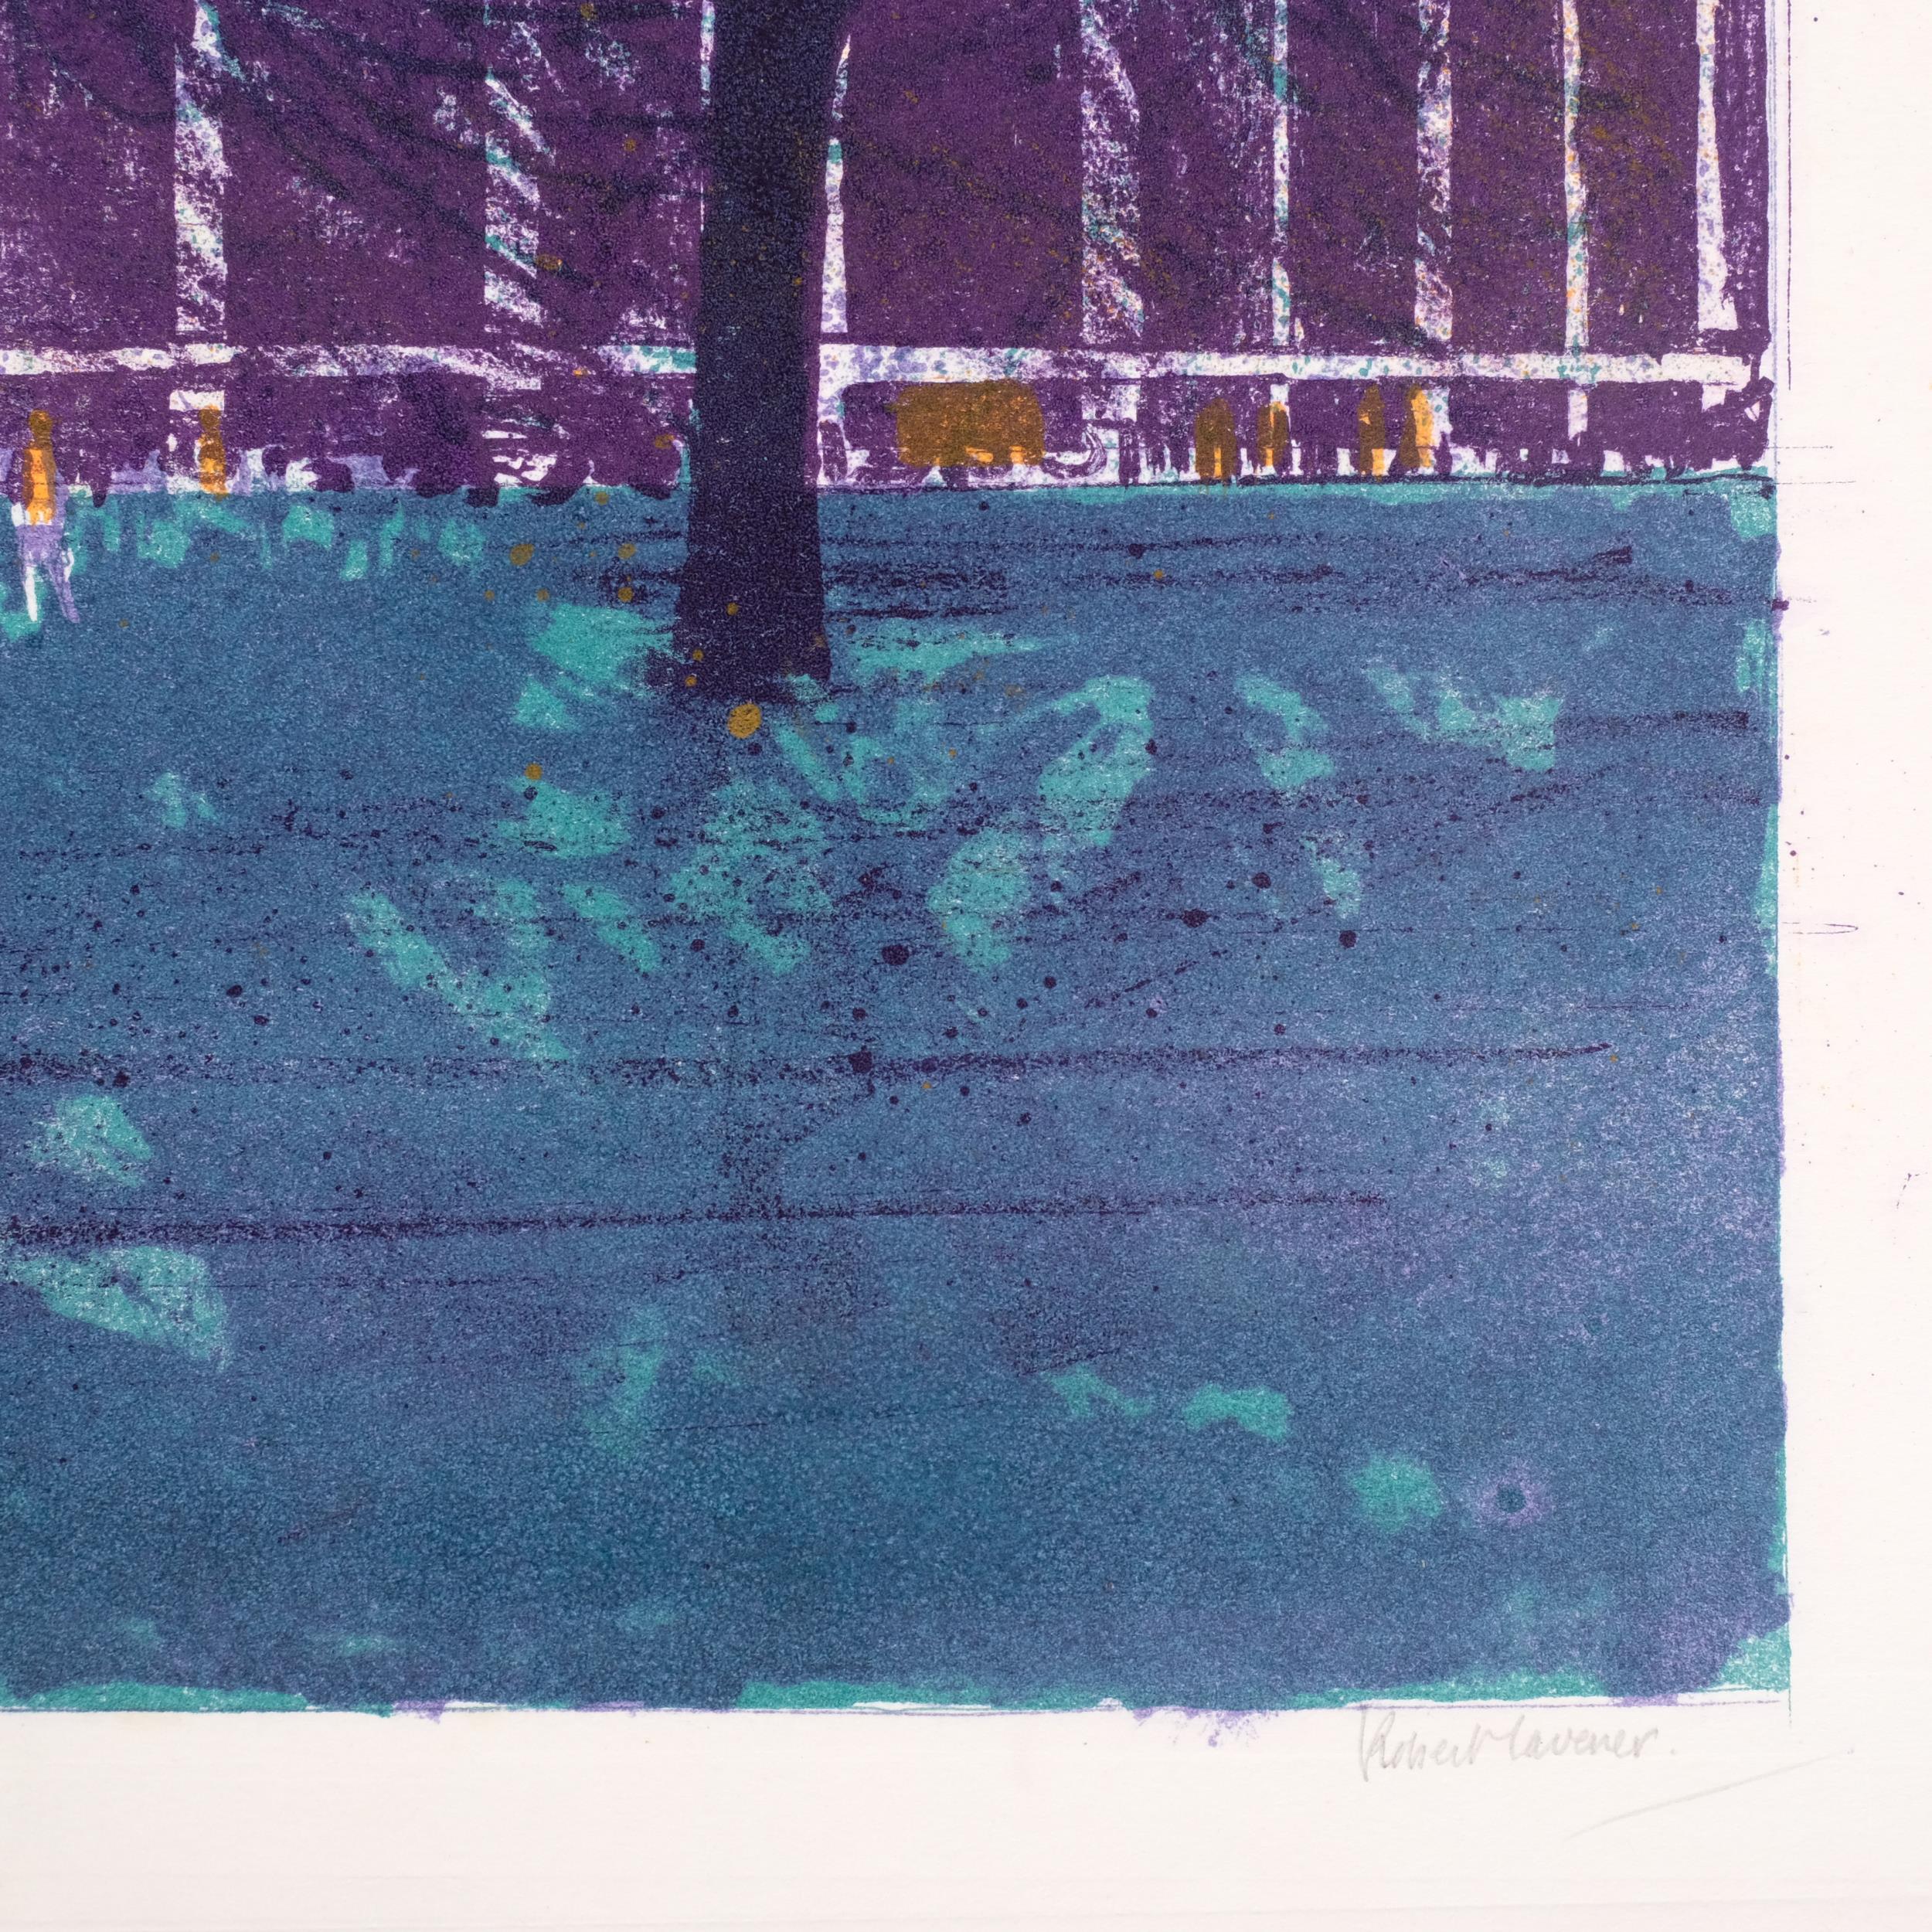 Robert Tavener, American Embassy, Grosvenor Square, lithograph, 1968, signed in pencil, no. 11/25, - Image 3 of 4